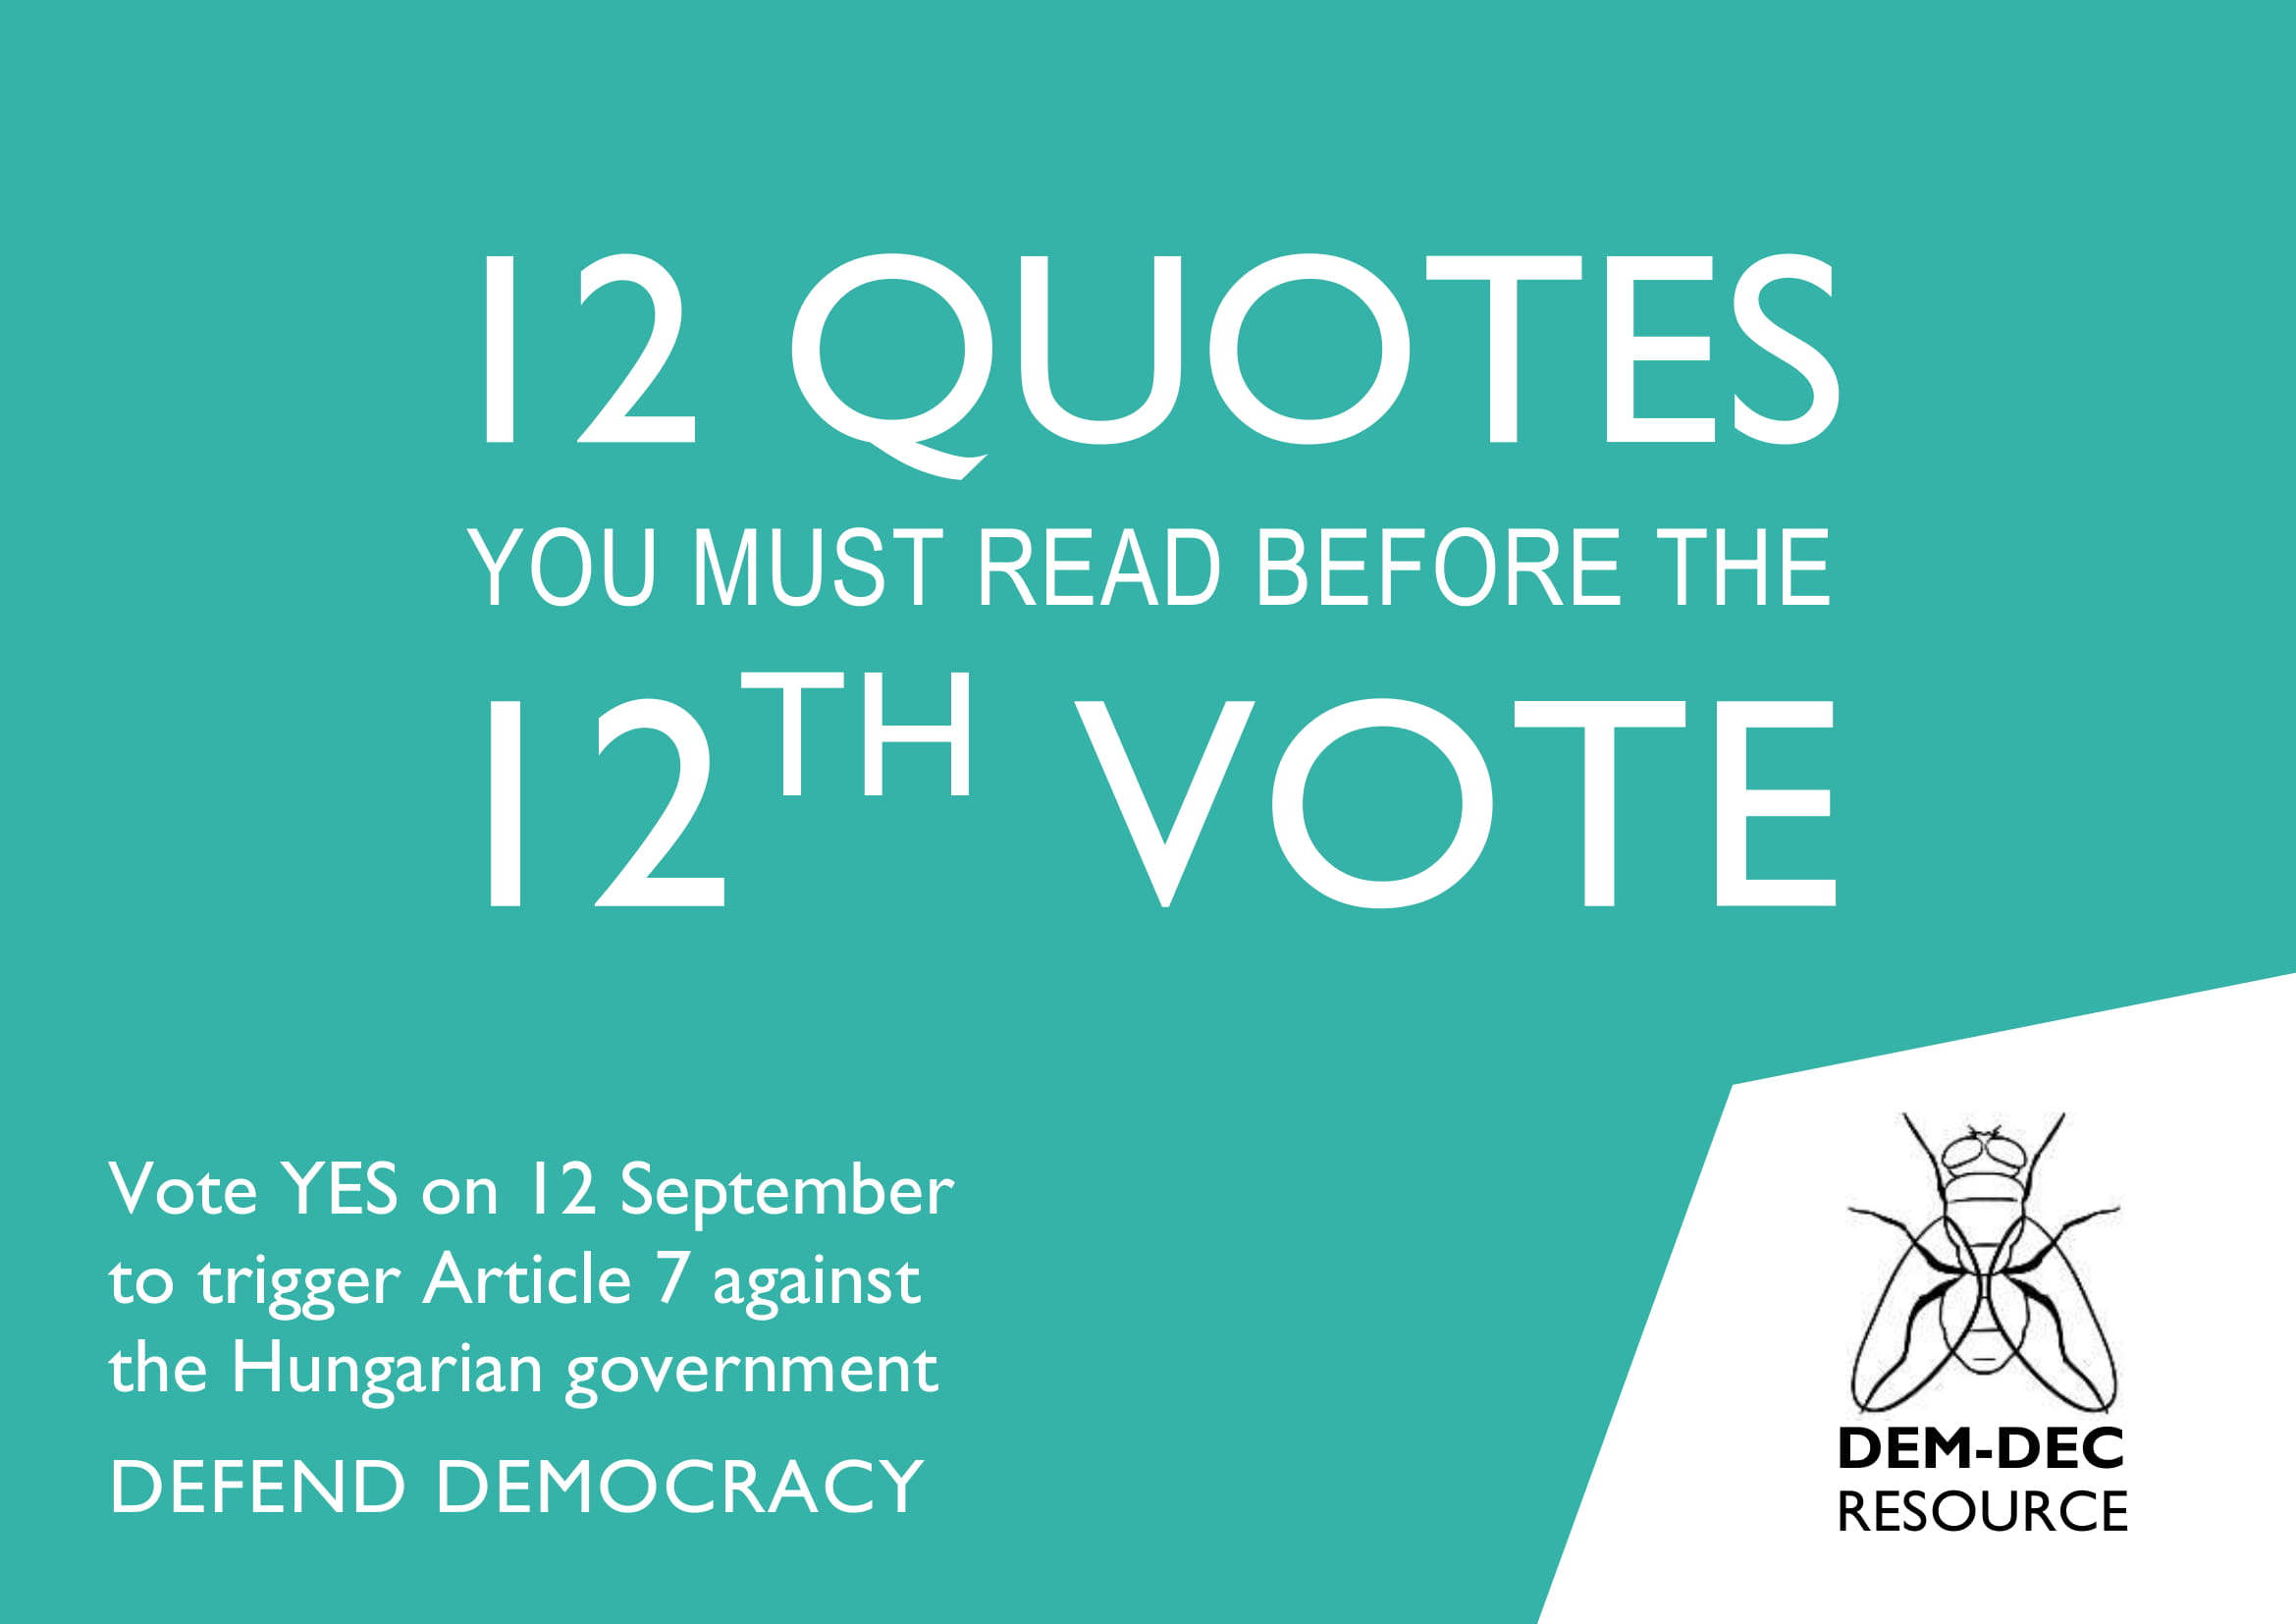 12 Quotes for the 12th Vote [draft]-01.jpg